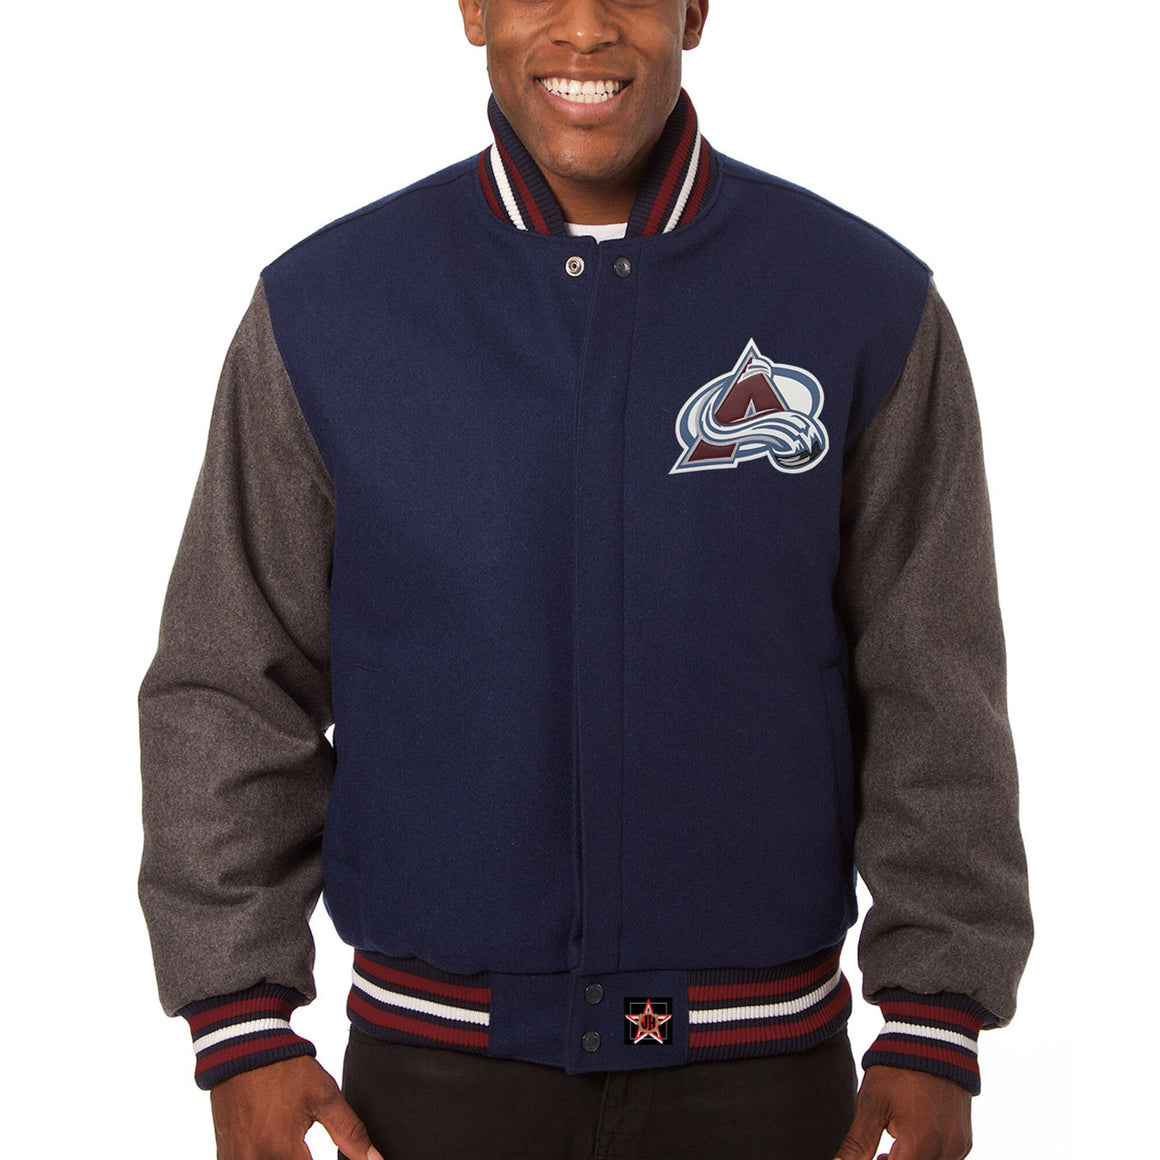 Colorado Avalanche Two-Tone All Wool Jacket - Navy/Gray | J.H. Sports ...